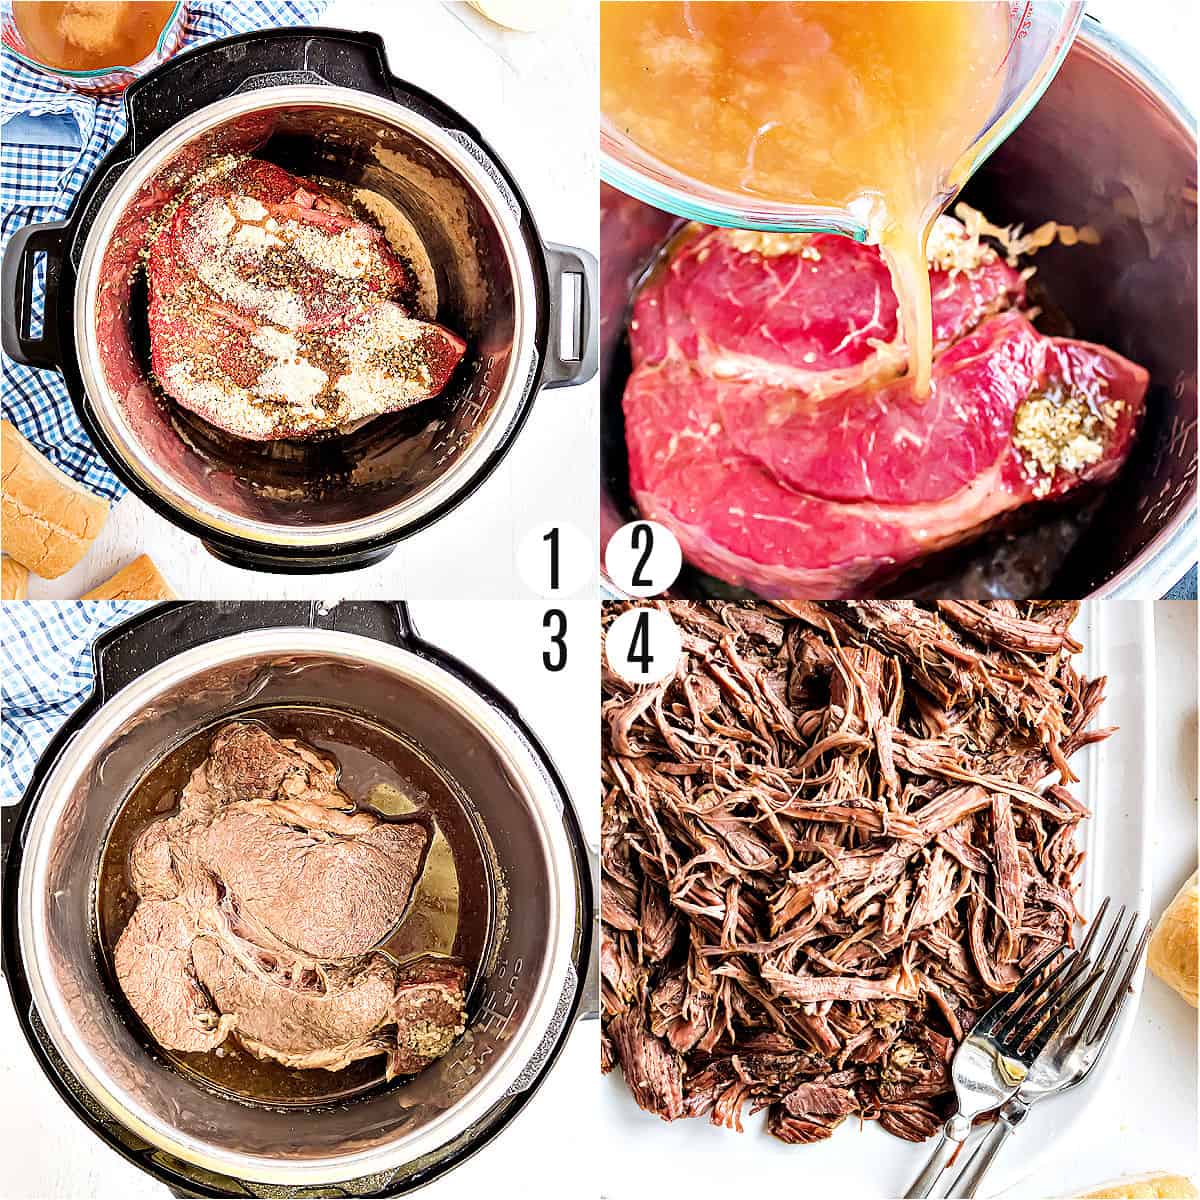 Step by step photos showing how to make french dip in the Instant Pot.